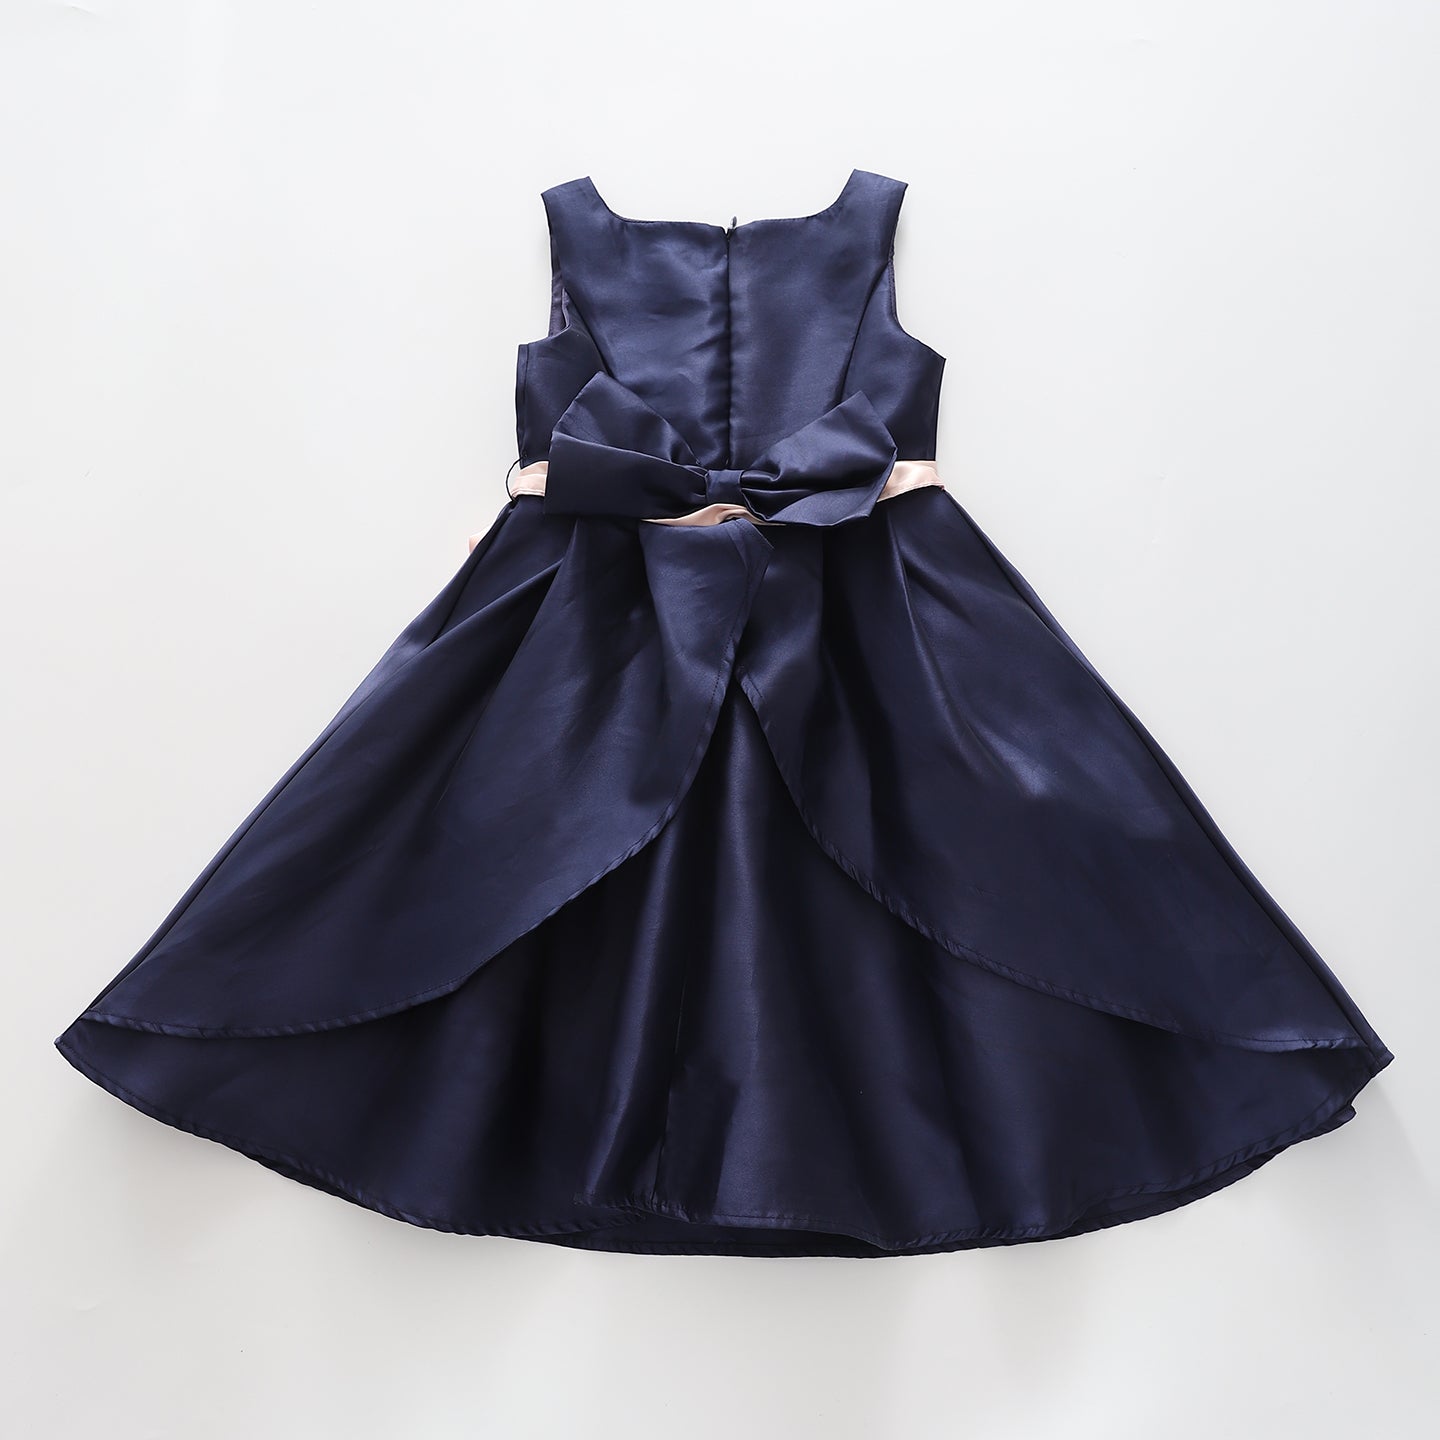 Girl's Navy Blue and Pink Rose Party Dress